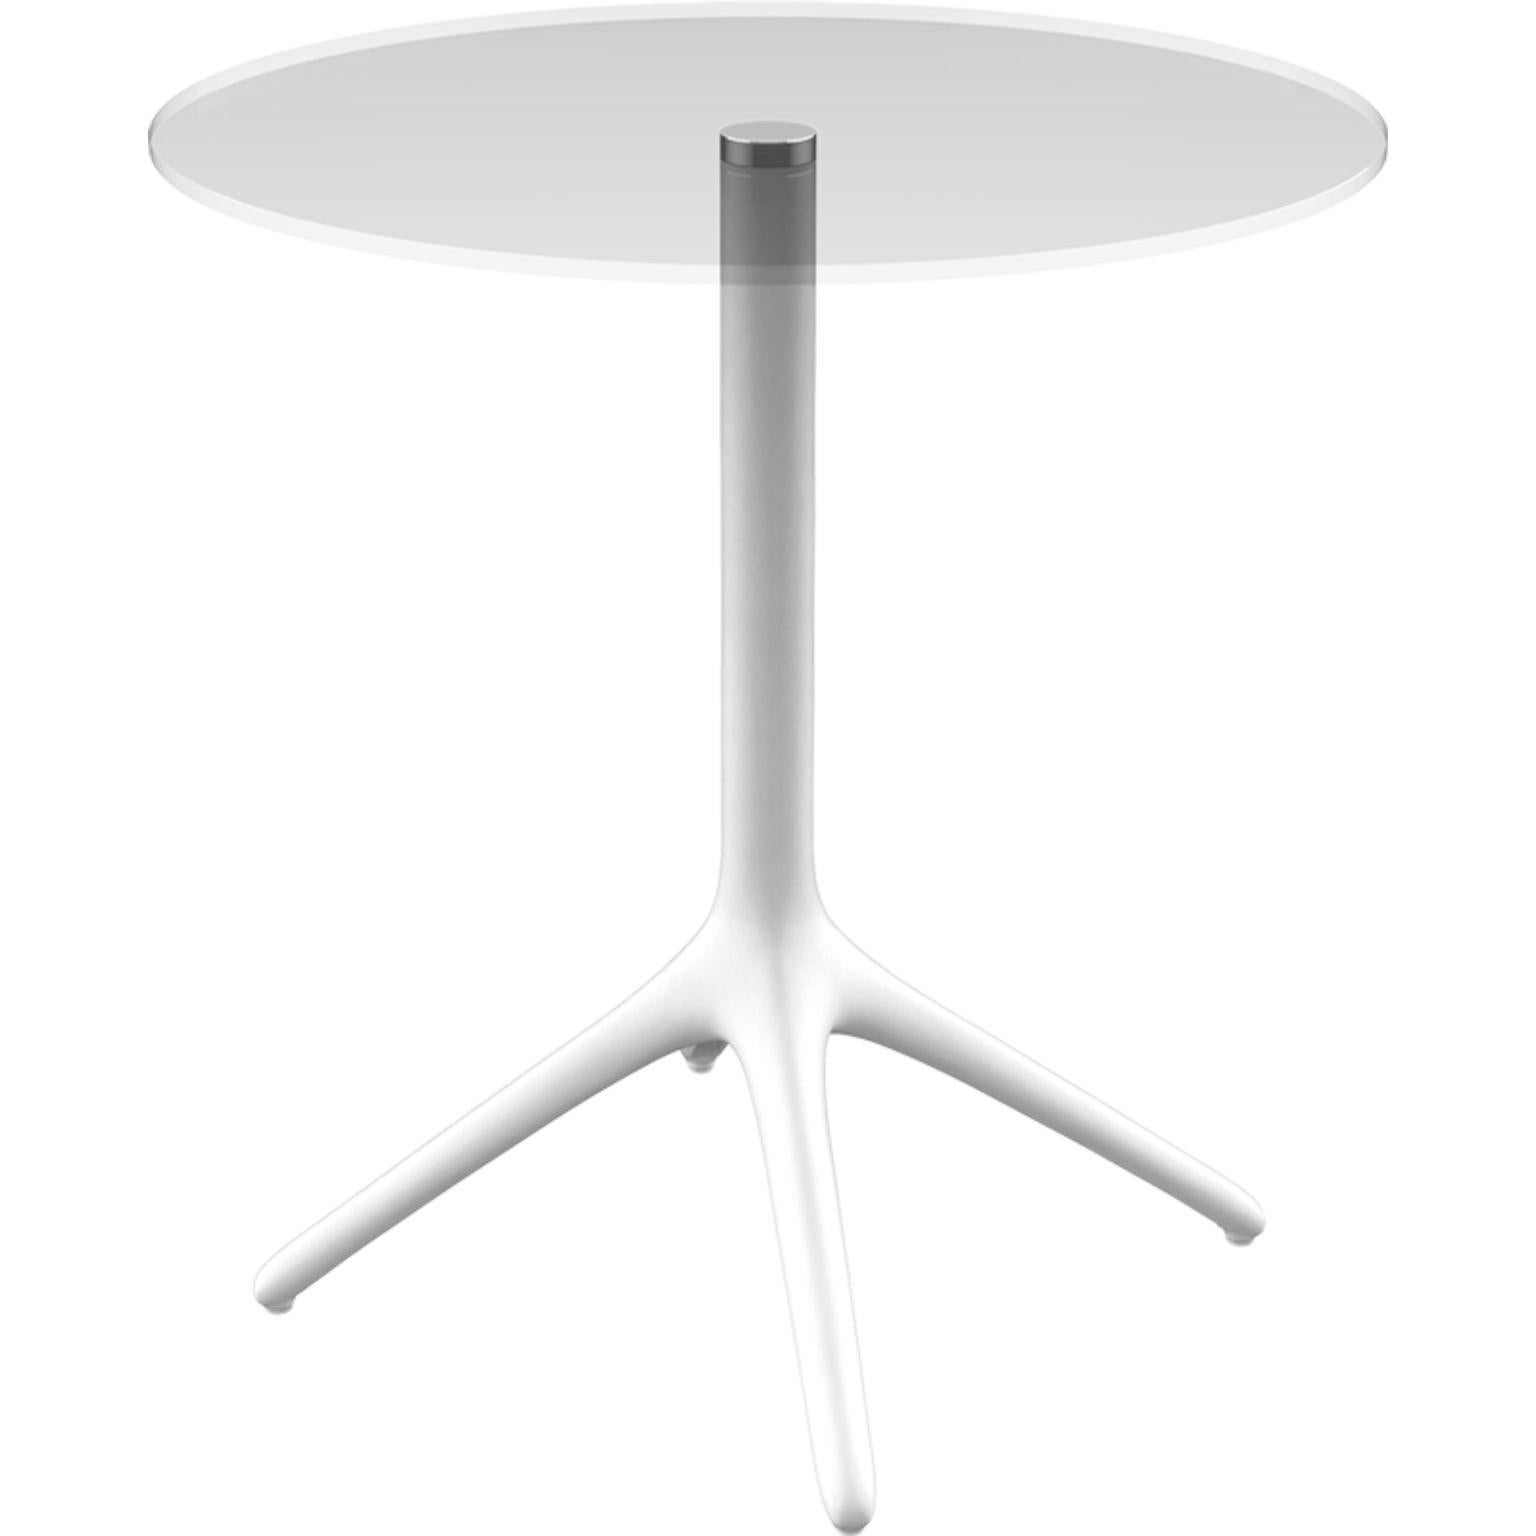 Uni white table 73 by Mowee.
Dimensions: D45.5 x H73 cm.
Material: Aluminium, tempered glass.
Weight: 5.5 kg.
Also Available in different colours and finishes. Collapsable version available. 

A table designed to be as versatile as possible